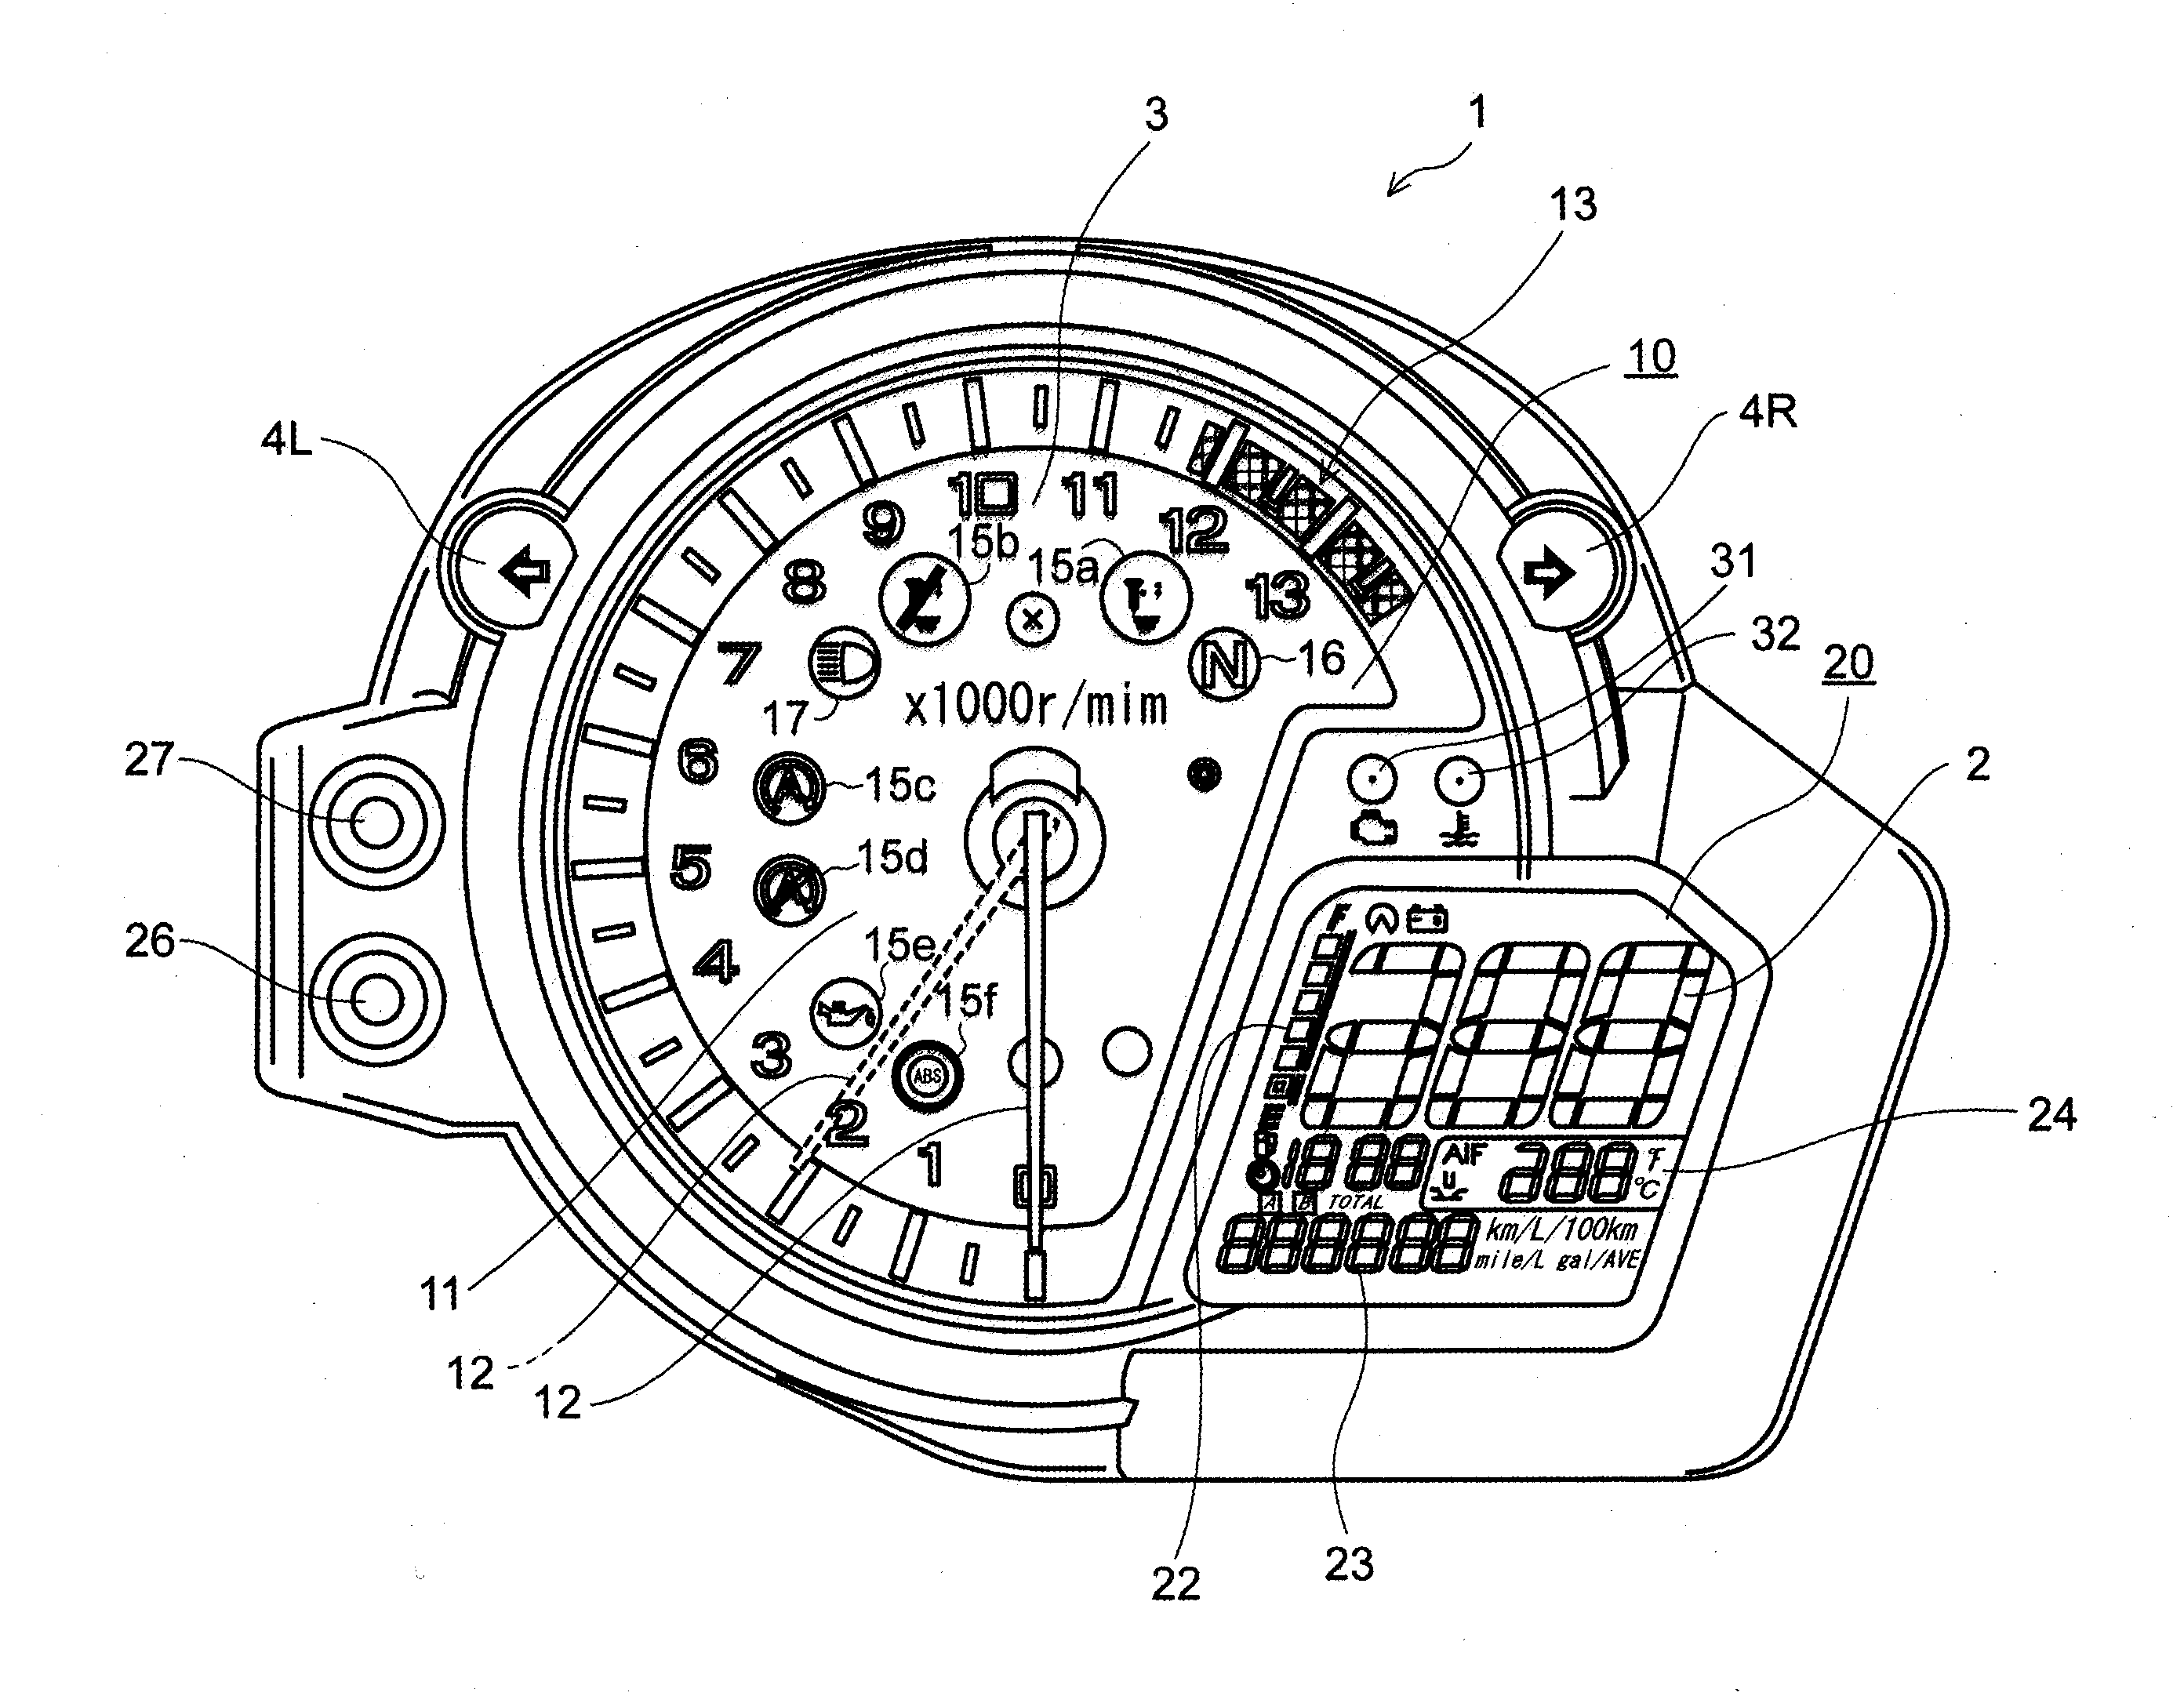 Traction control display device for vehicle